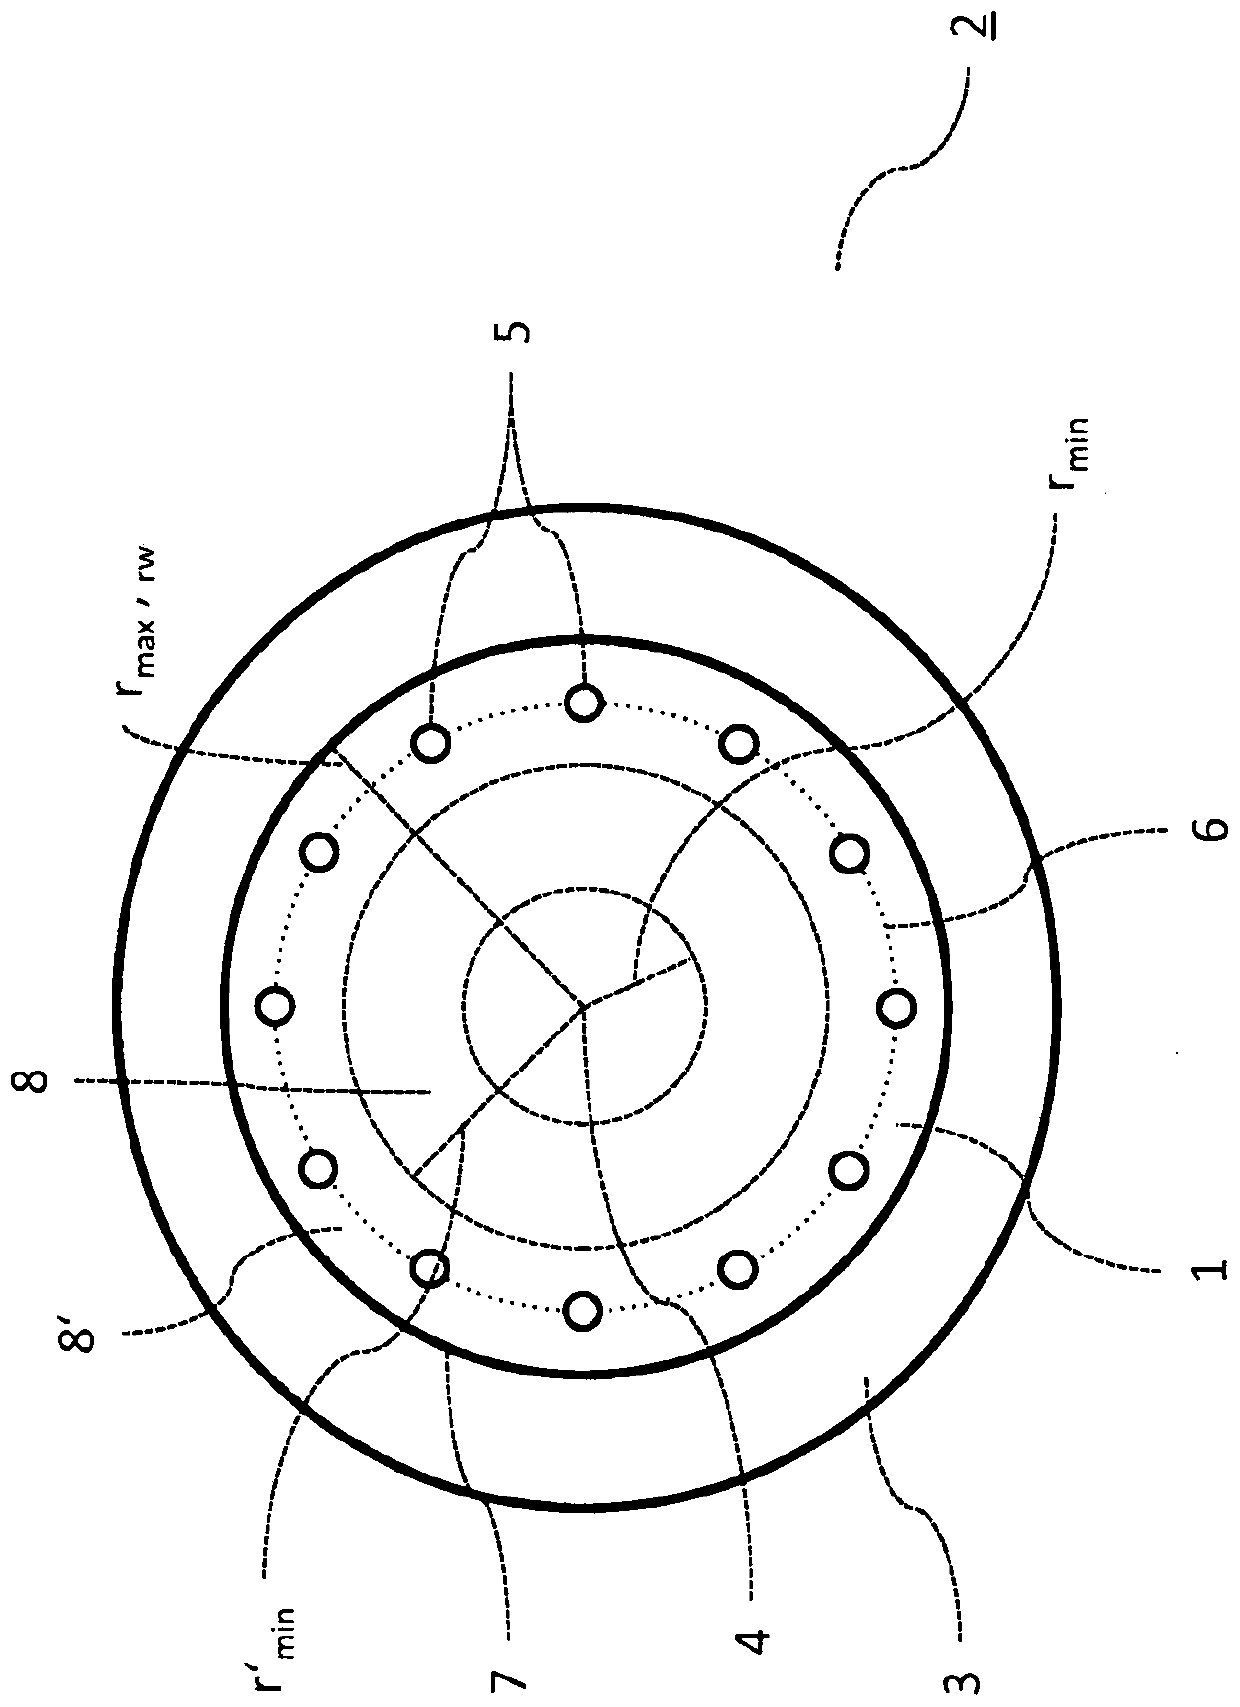 Drum, method for removing a tire and method for shrink fitting a tire onto the shaft of a roller